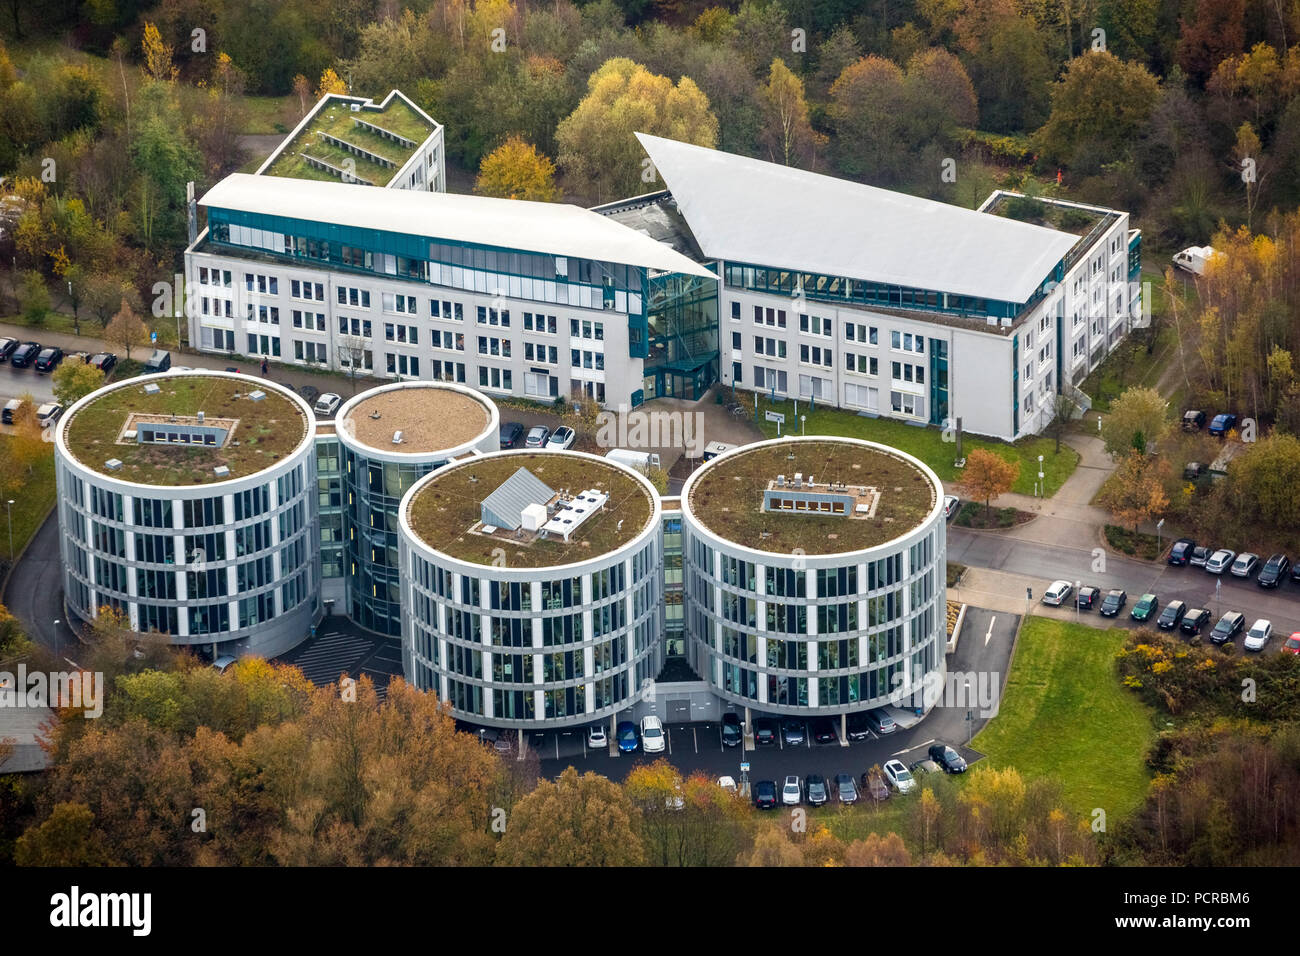 Institute of Environmental Technology, Dental and Biomedical Research and Development Centre, private University of Witten and Herdecke, Witten, Ruhr area, North Rhine-Westphalia, Germany Stock Photo